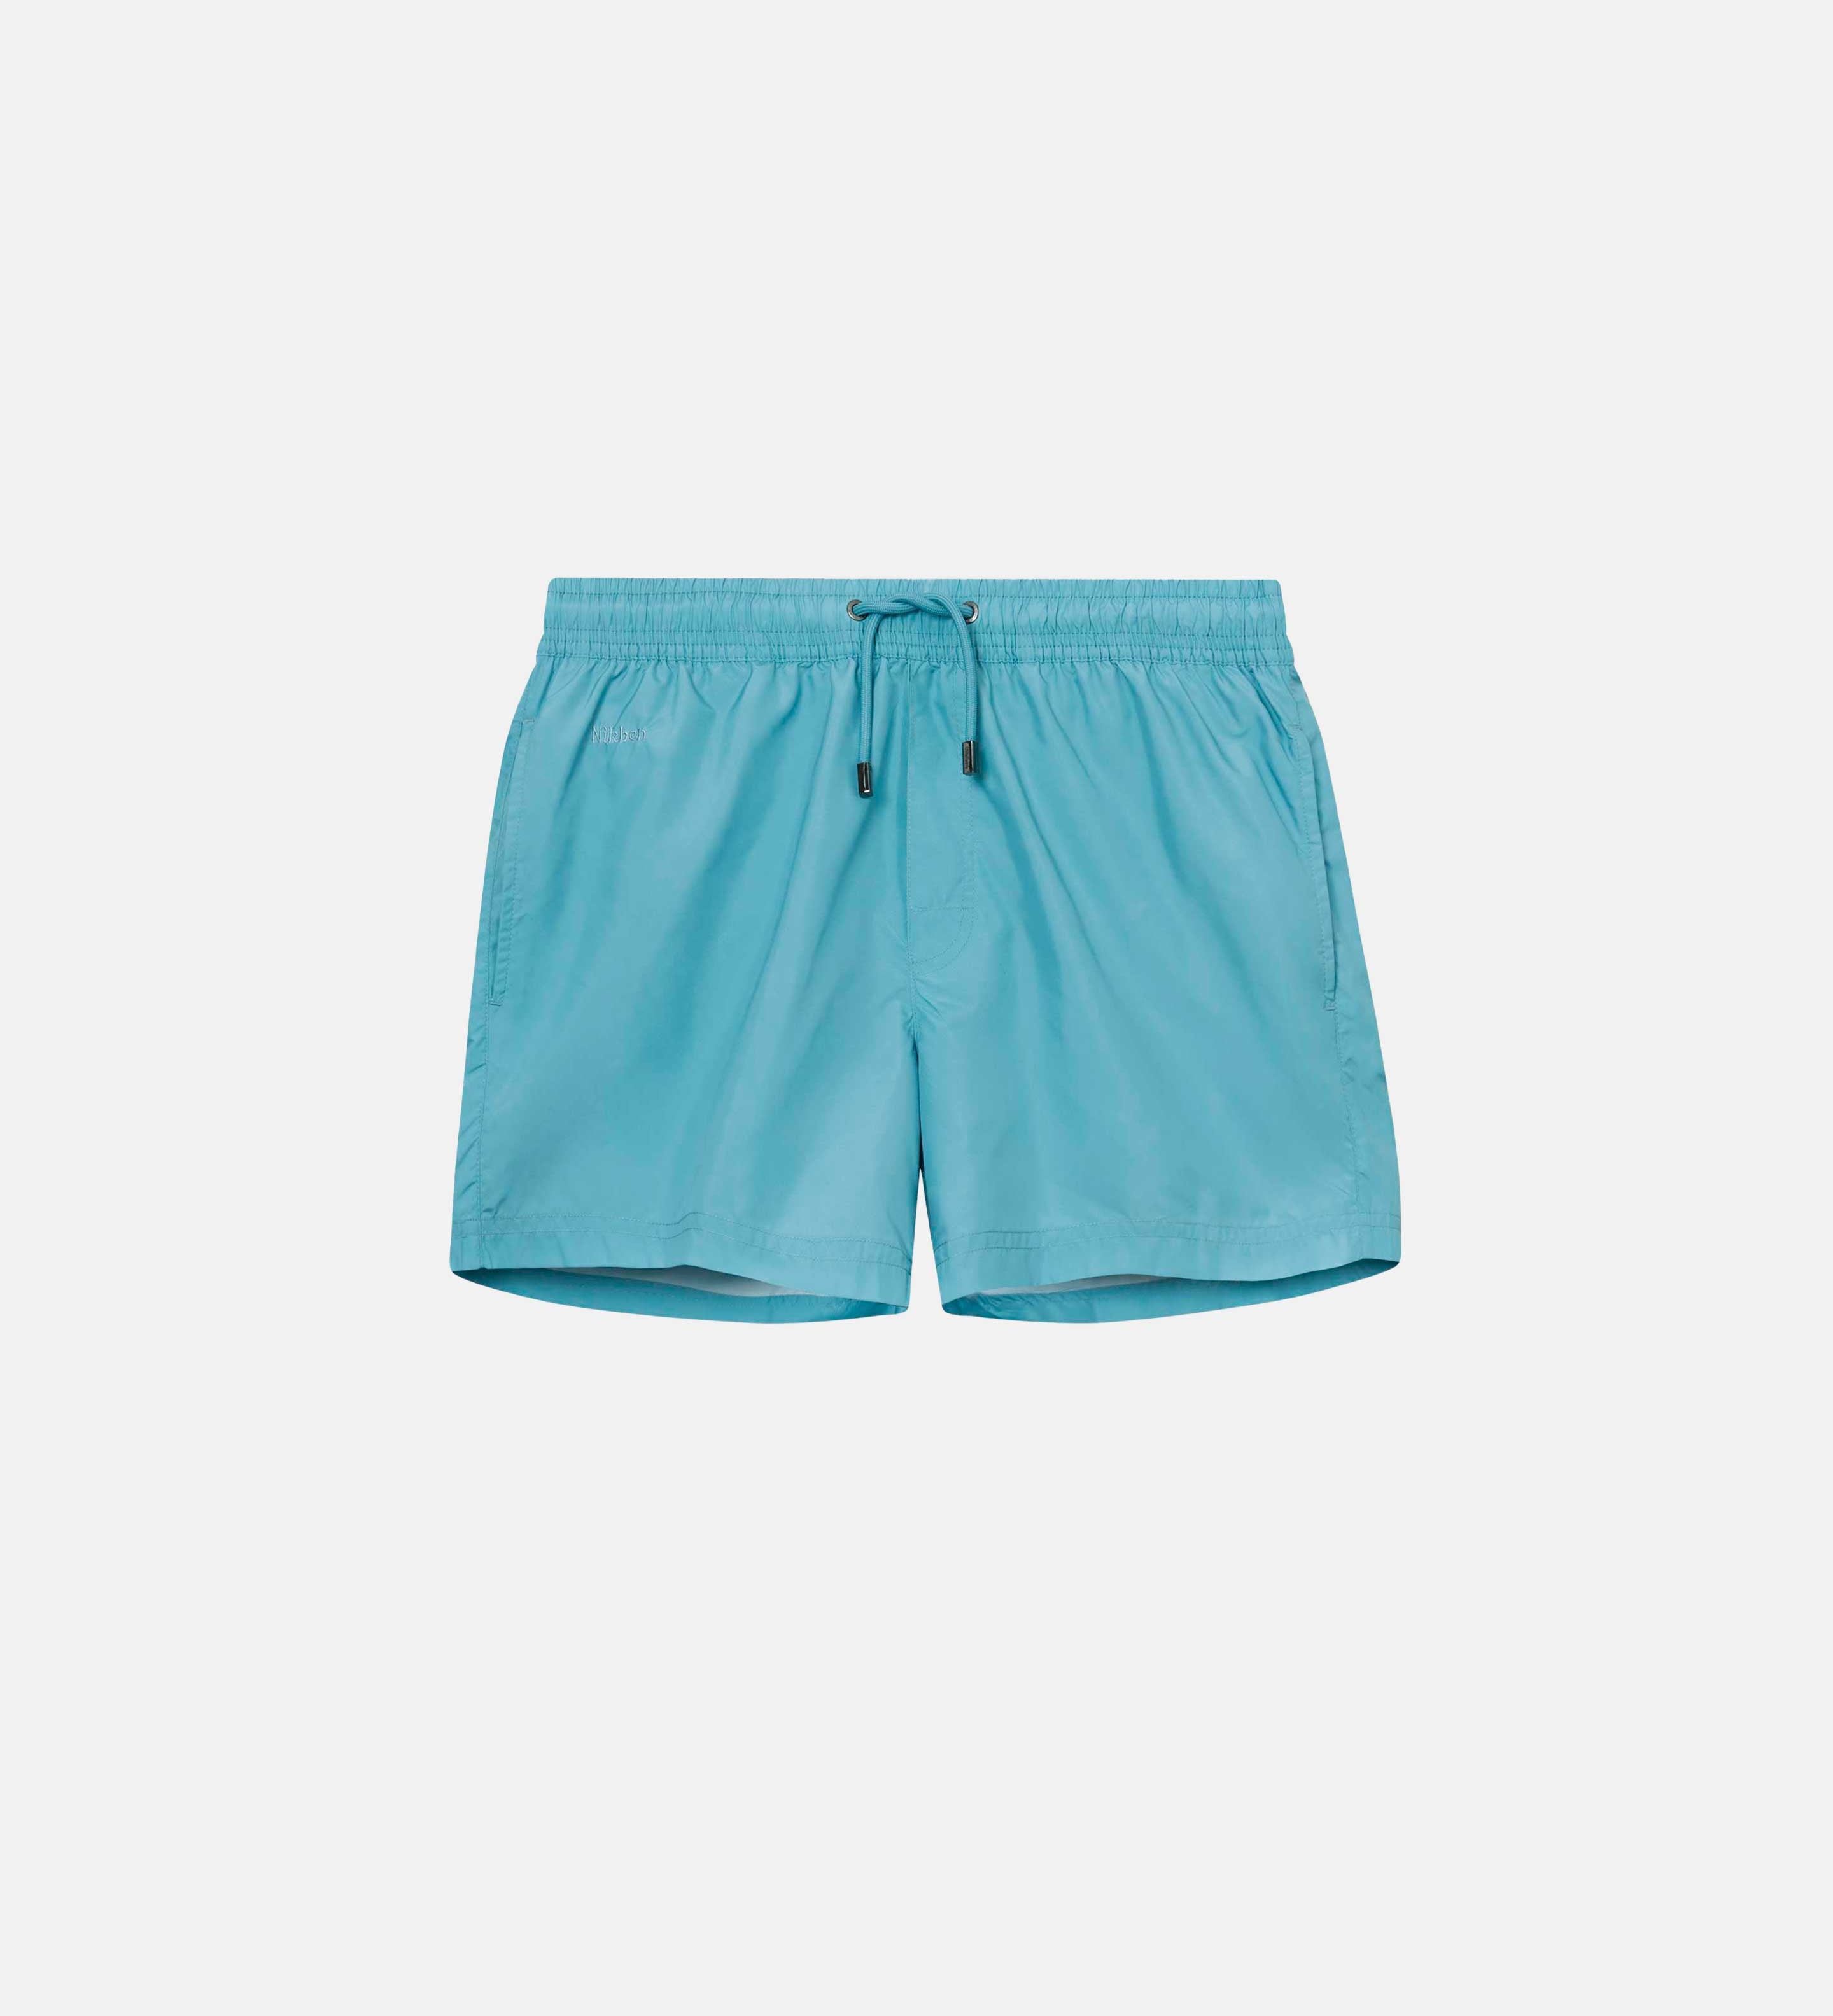 Light blue swim trunks. Mid length with drawstring and two side pockets.